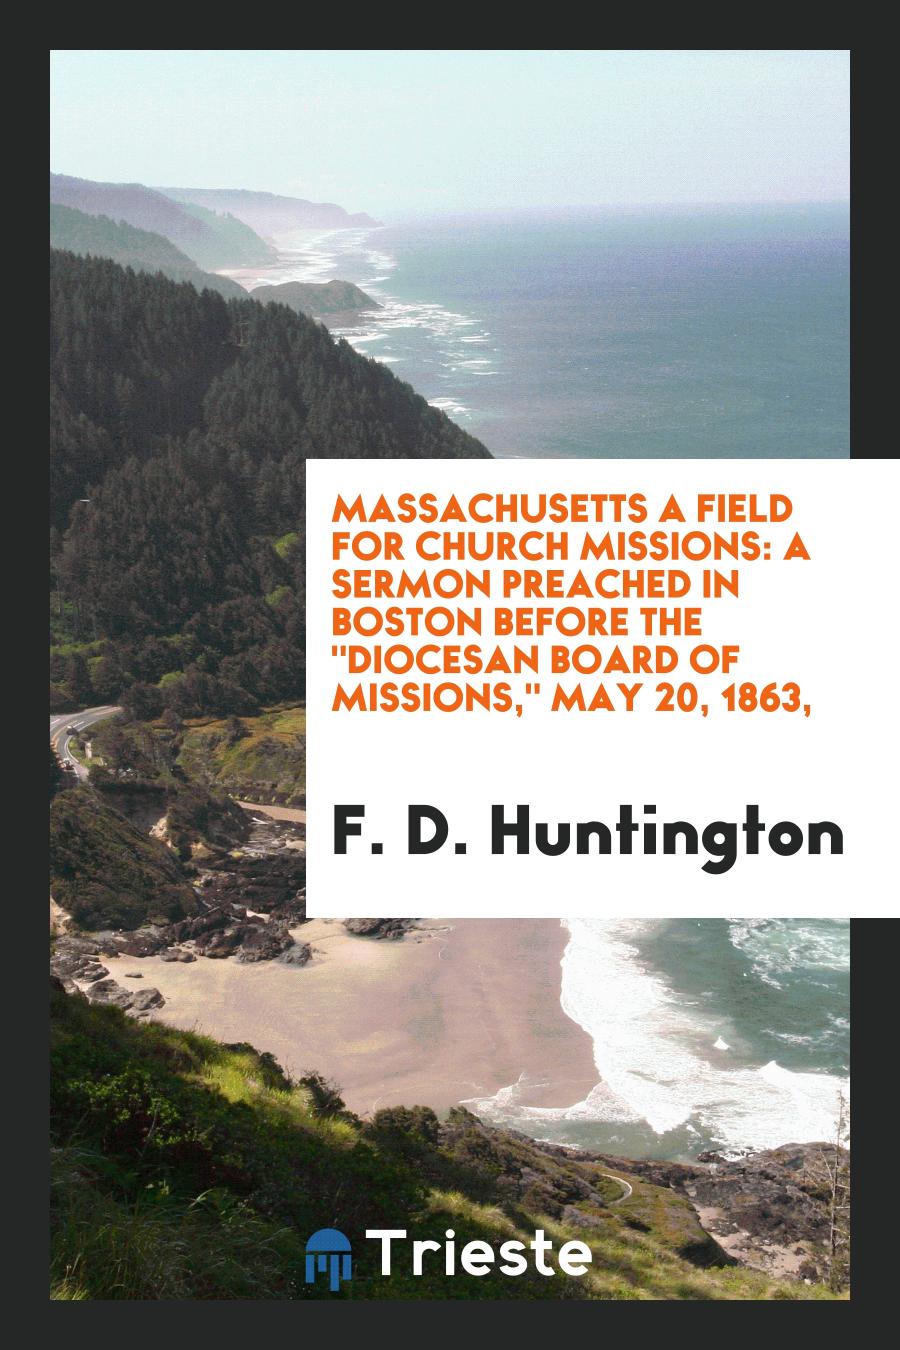 Massachusetts a Field for Church Missions: A Sermon Preached in Boston Before the "Diocesan board of missions," May 20, 1863,